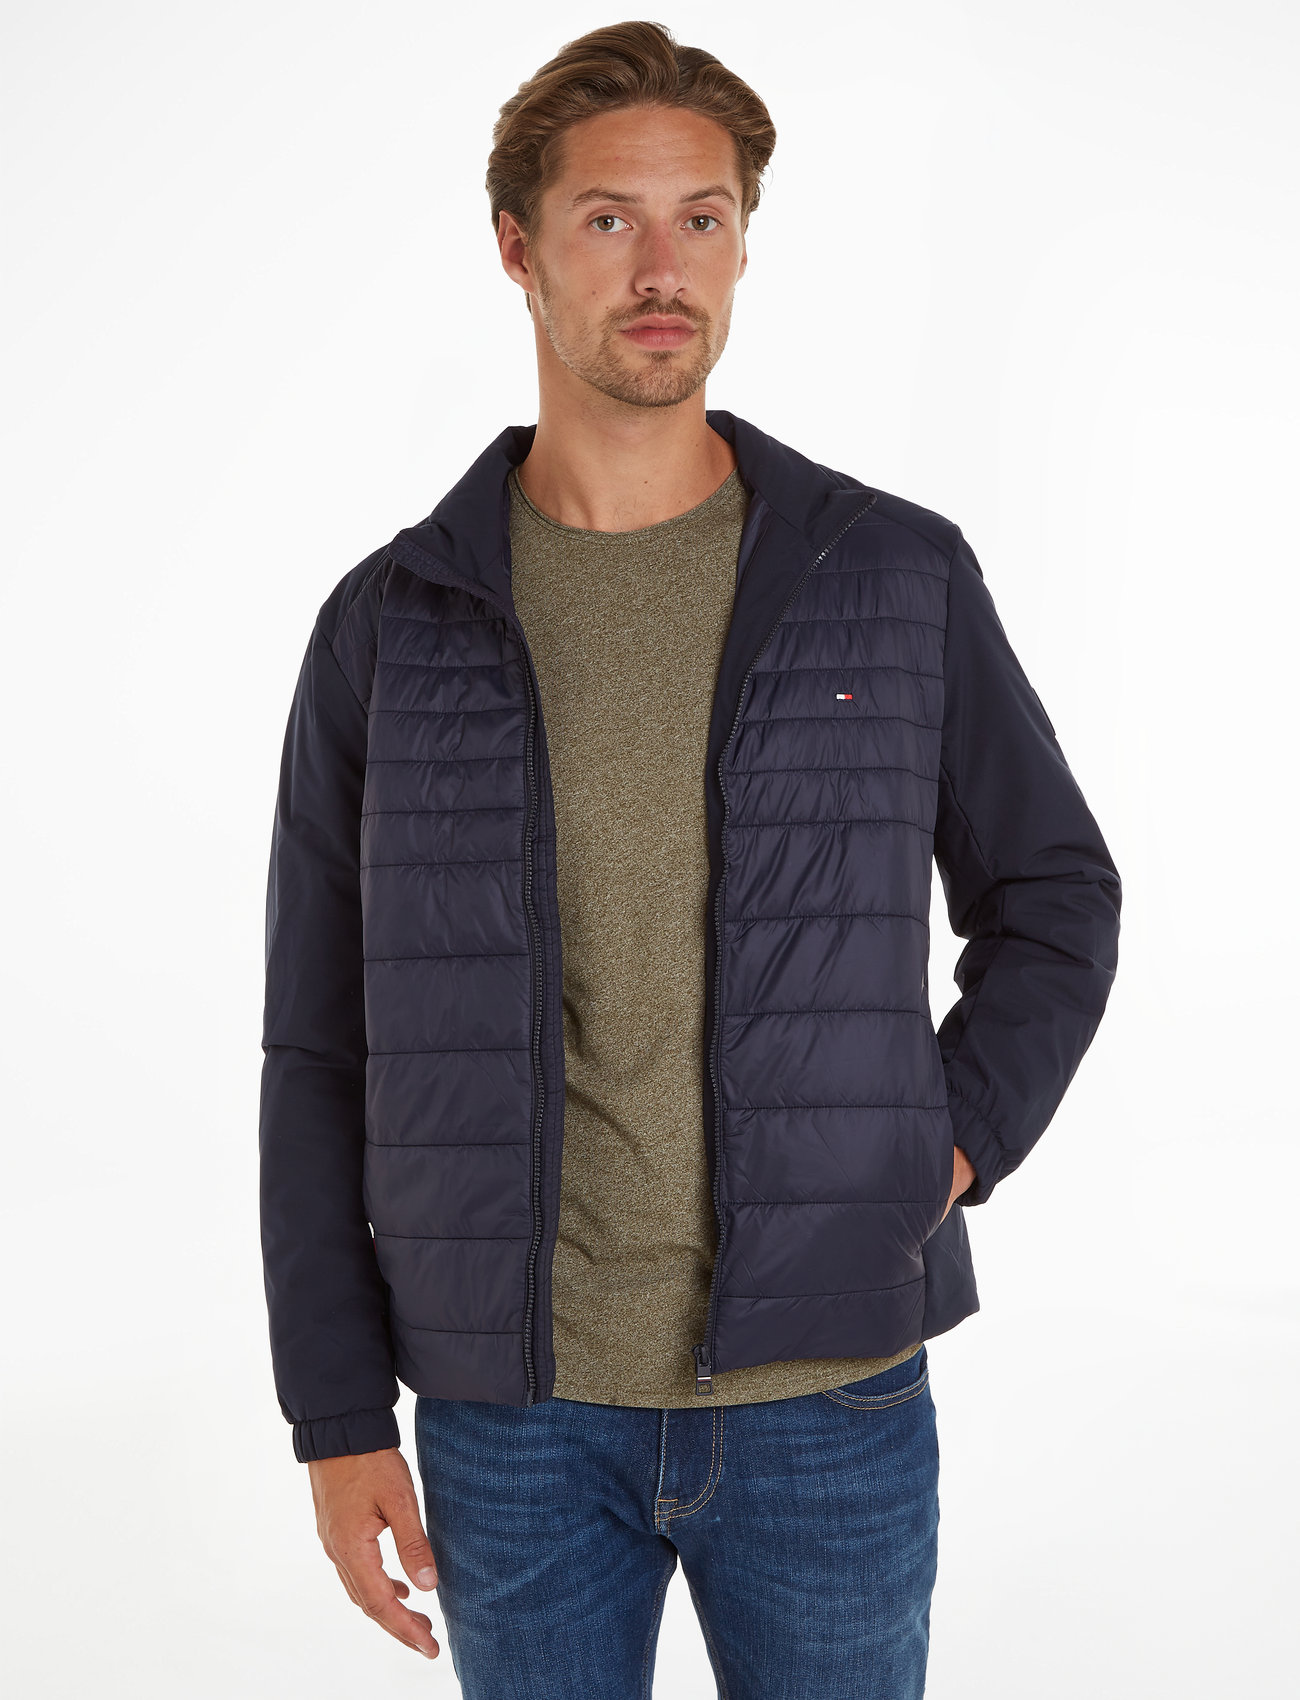 Tommy Hilfiger Cl Mix Media Stand Collar Jacket - 129.94 €. Buy Quilted  jackets from Tommy Hilfiger online at Boozt.com. Fast delivery and easy  returns